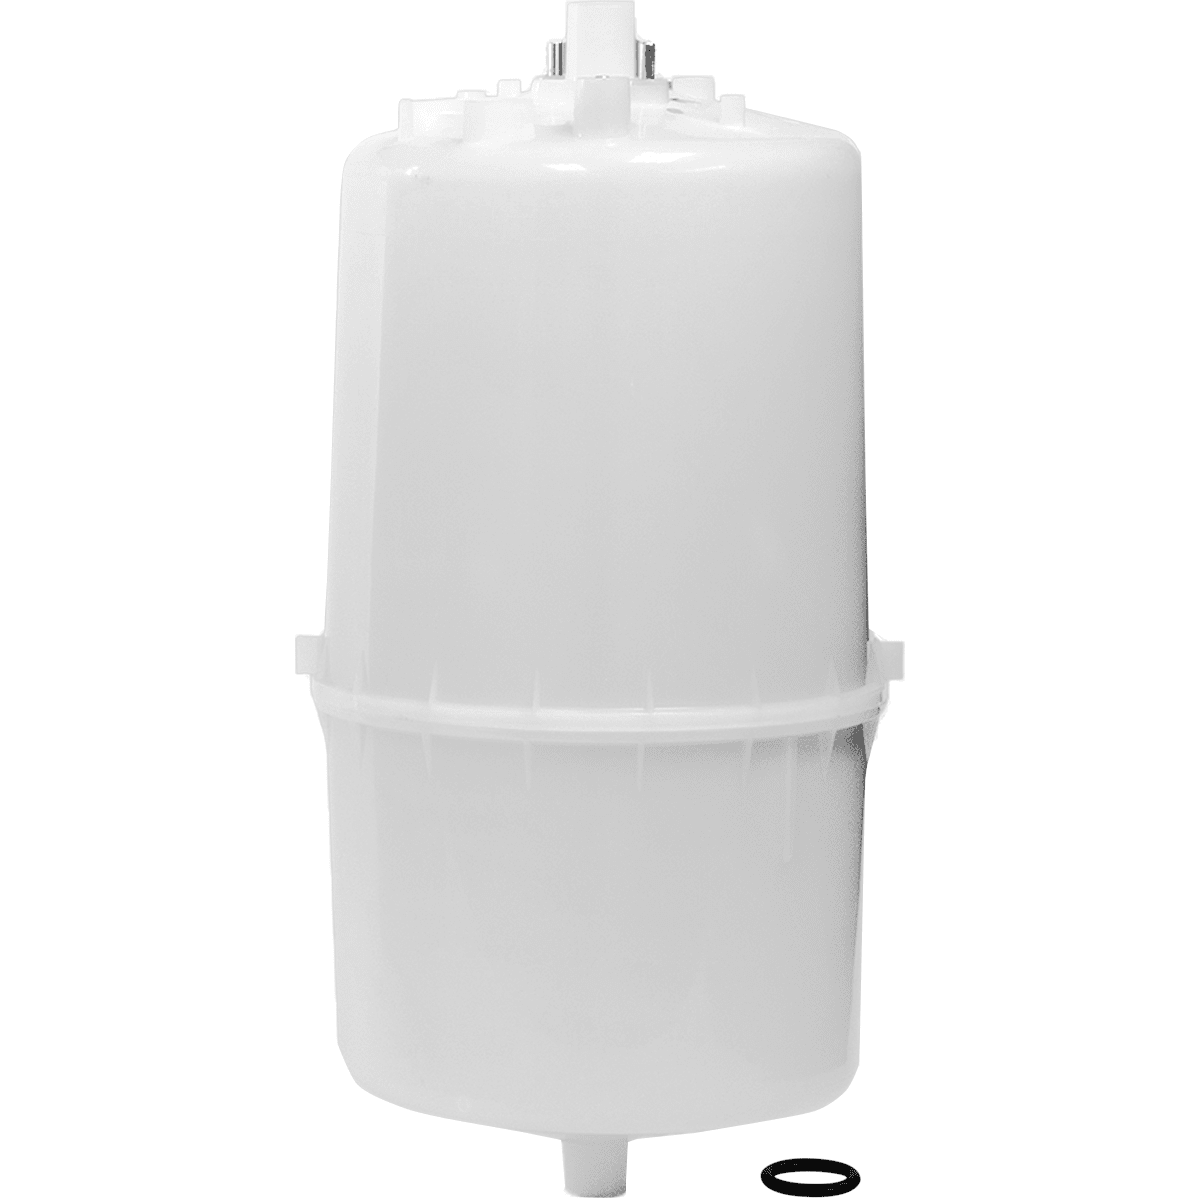 Aprilaire 303a Steam Humidifier Cylinder (fits Nortec® 303)